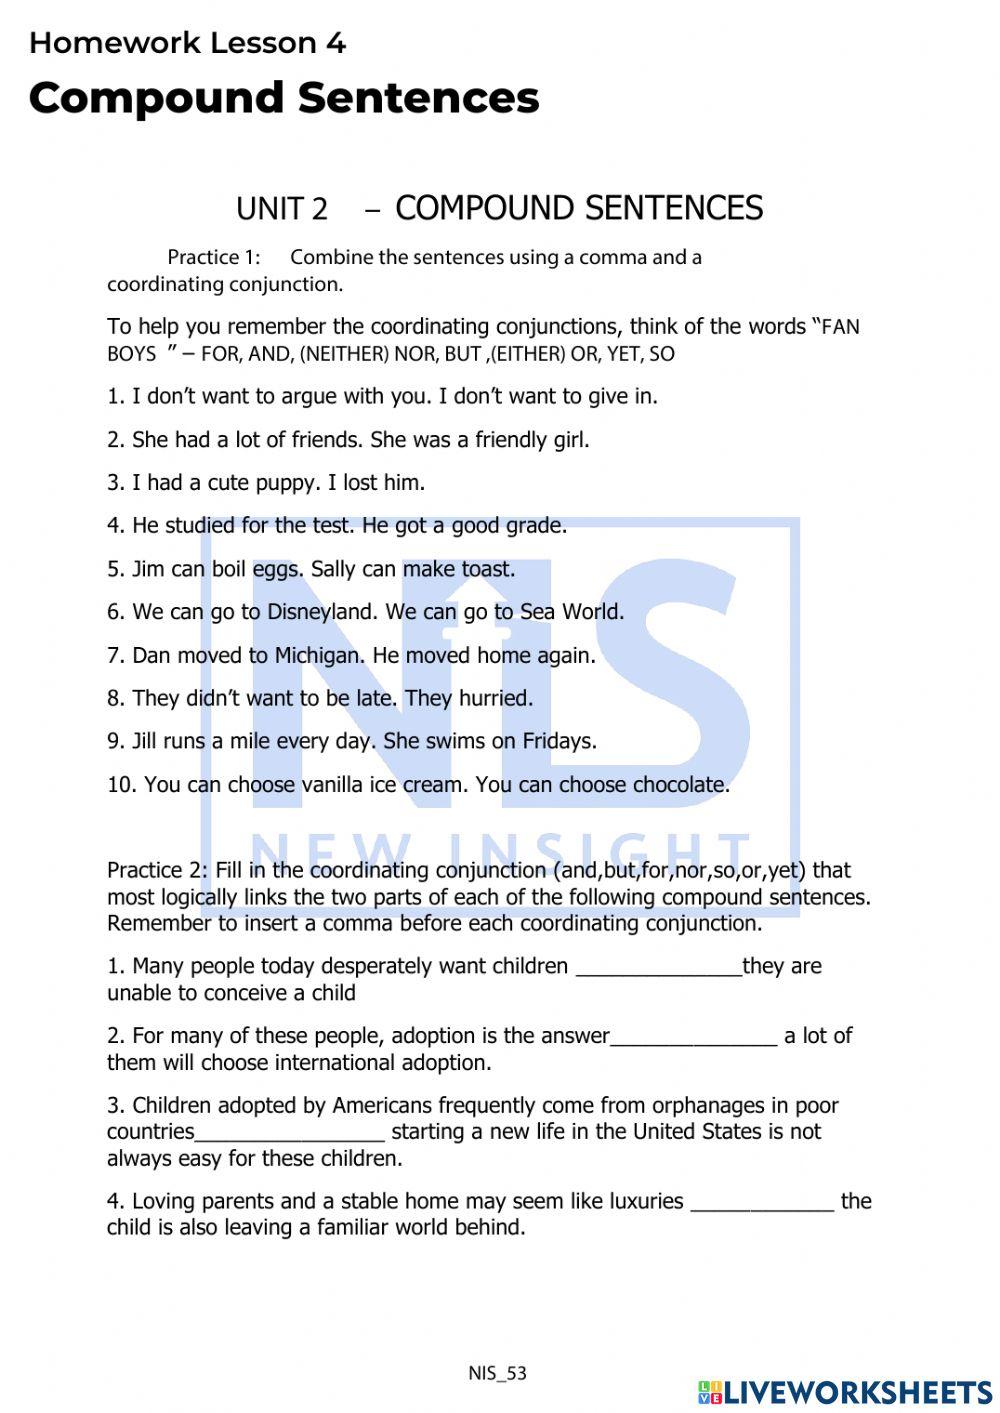 Compound Words interactive exercise for pre-intermediate | Live Worksheets